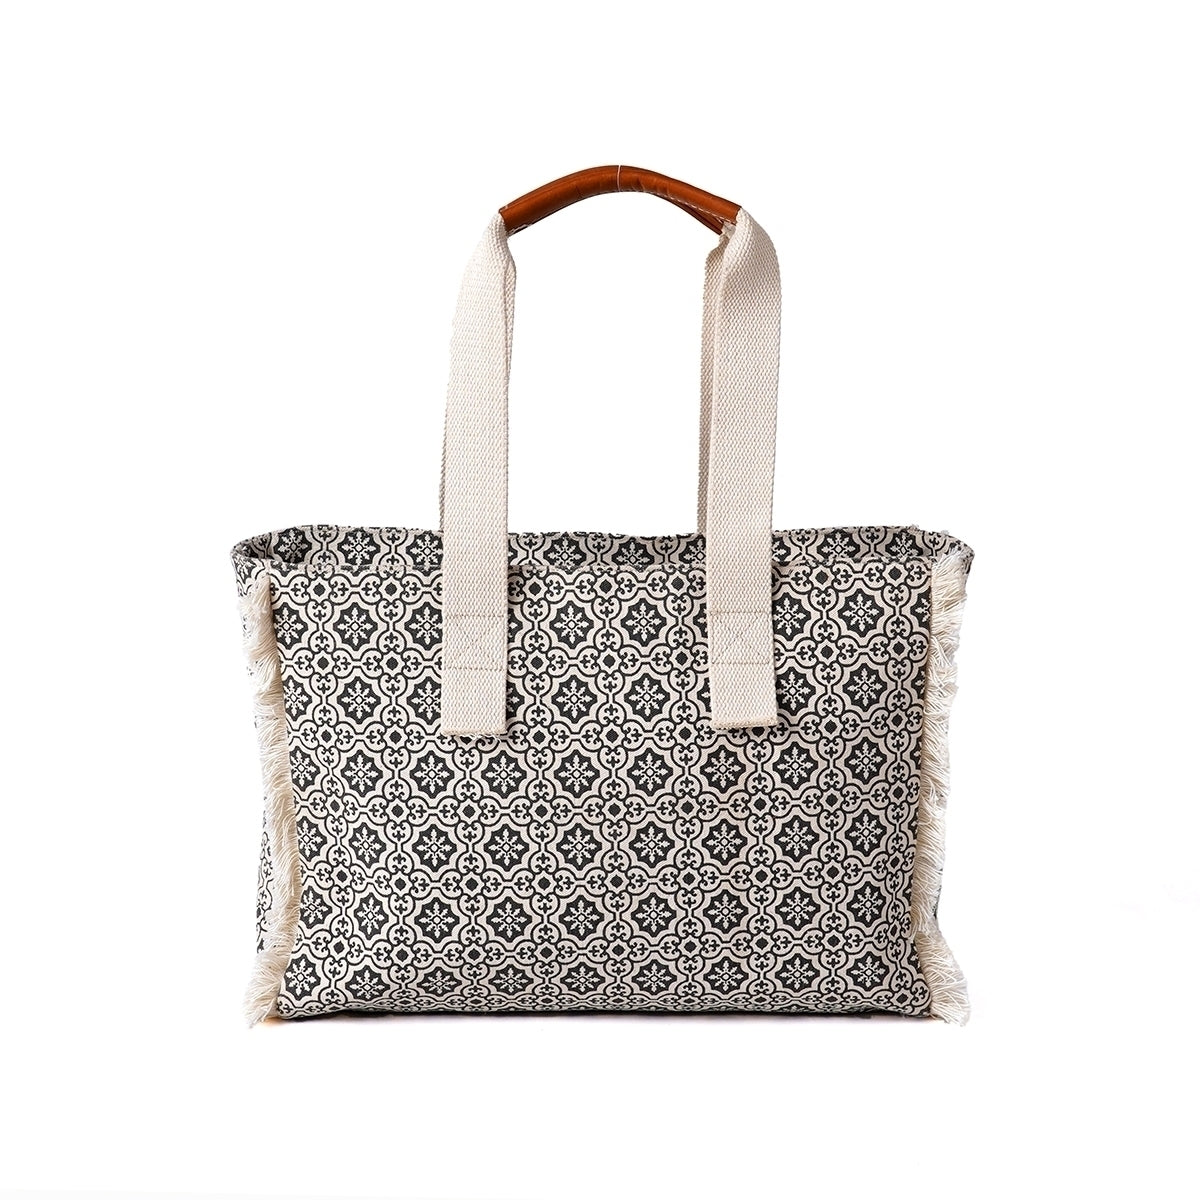 Black and white print canvas and leather tote bag, large tote, shoulder bag